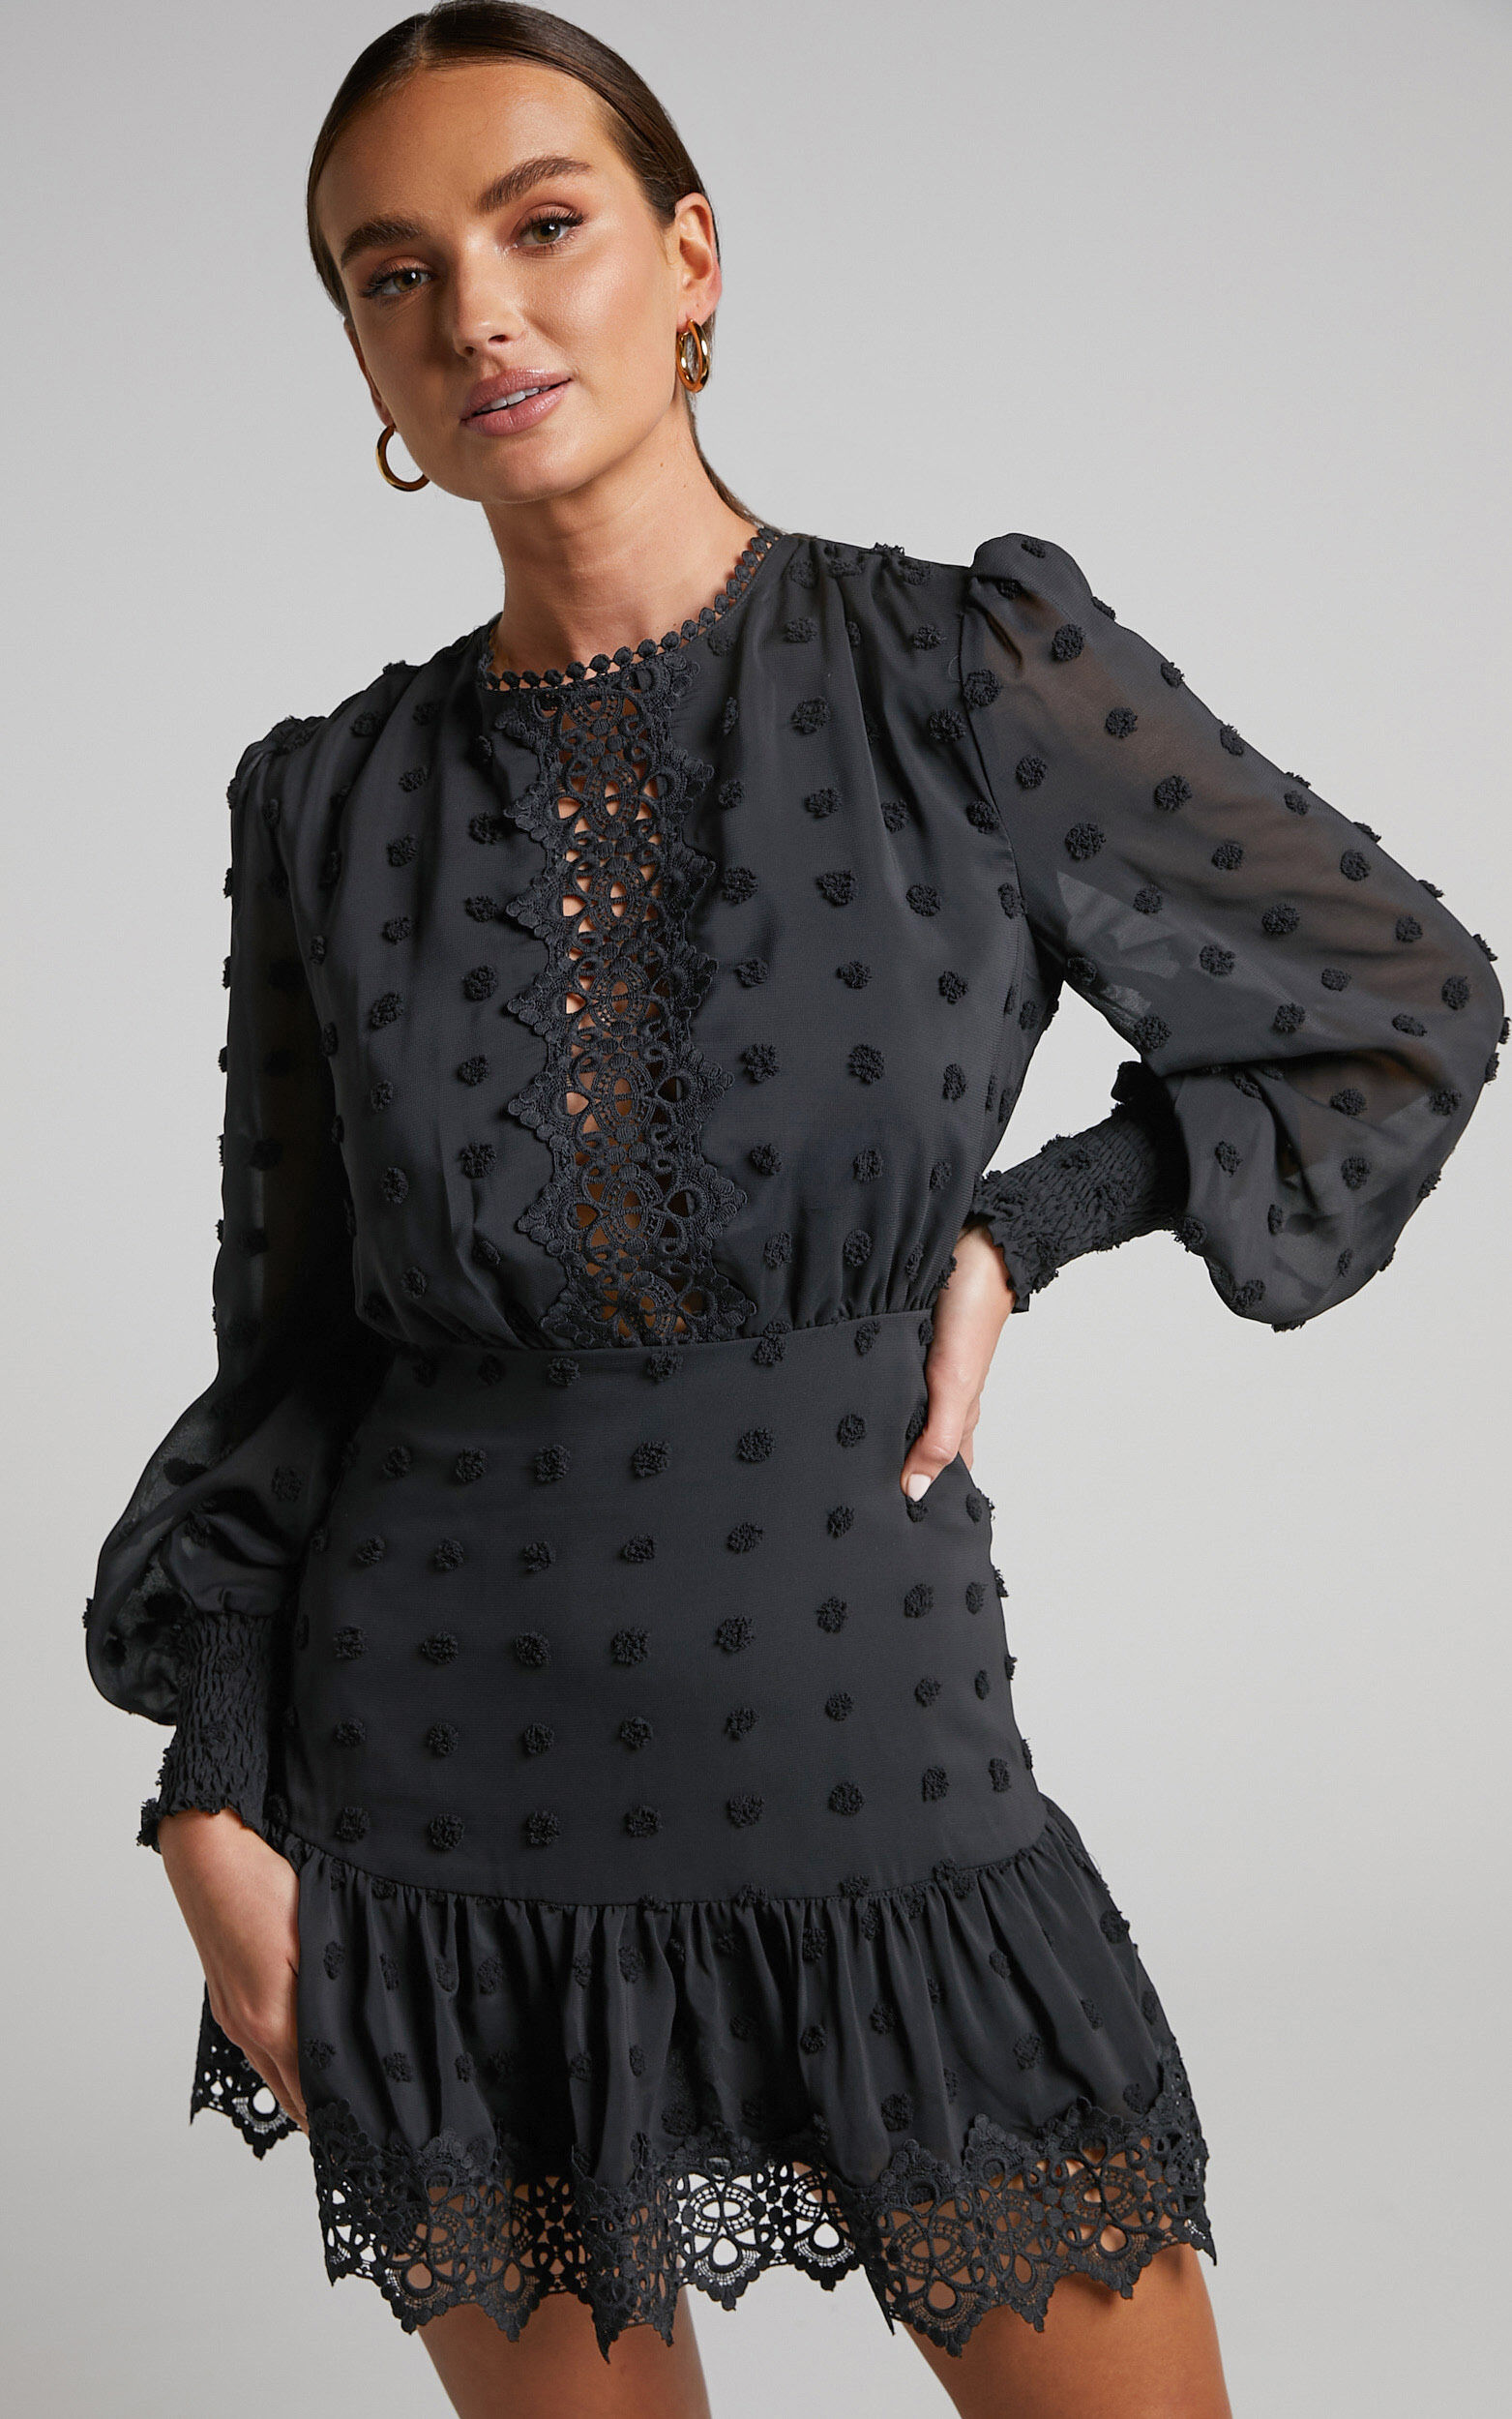 Meihna Mini Dress - Lace Detail Long Sleeve Dress in Black - 04, BLK1, super-hi-res image number null